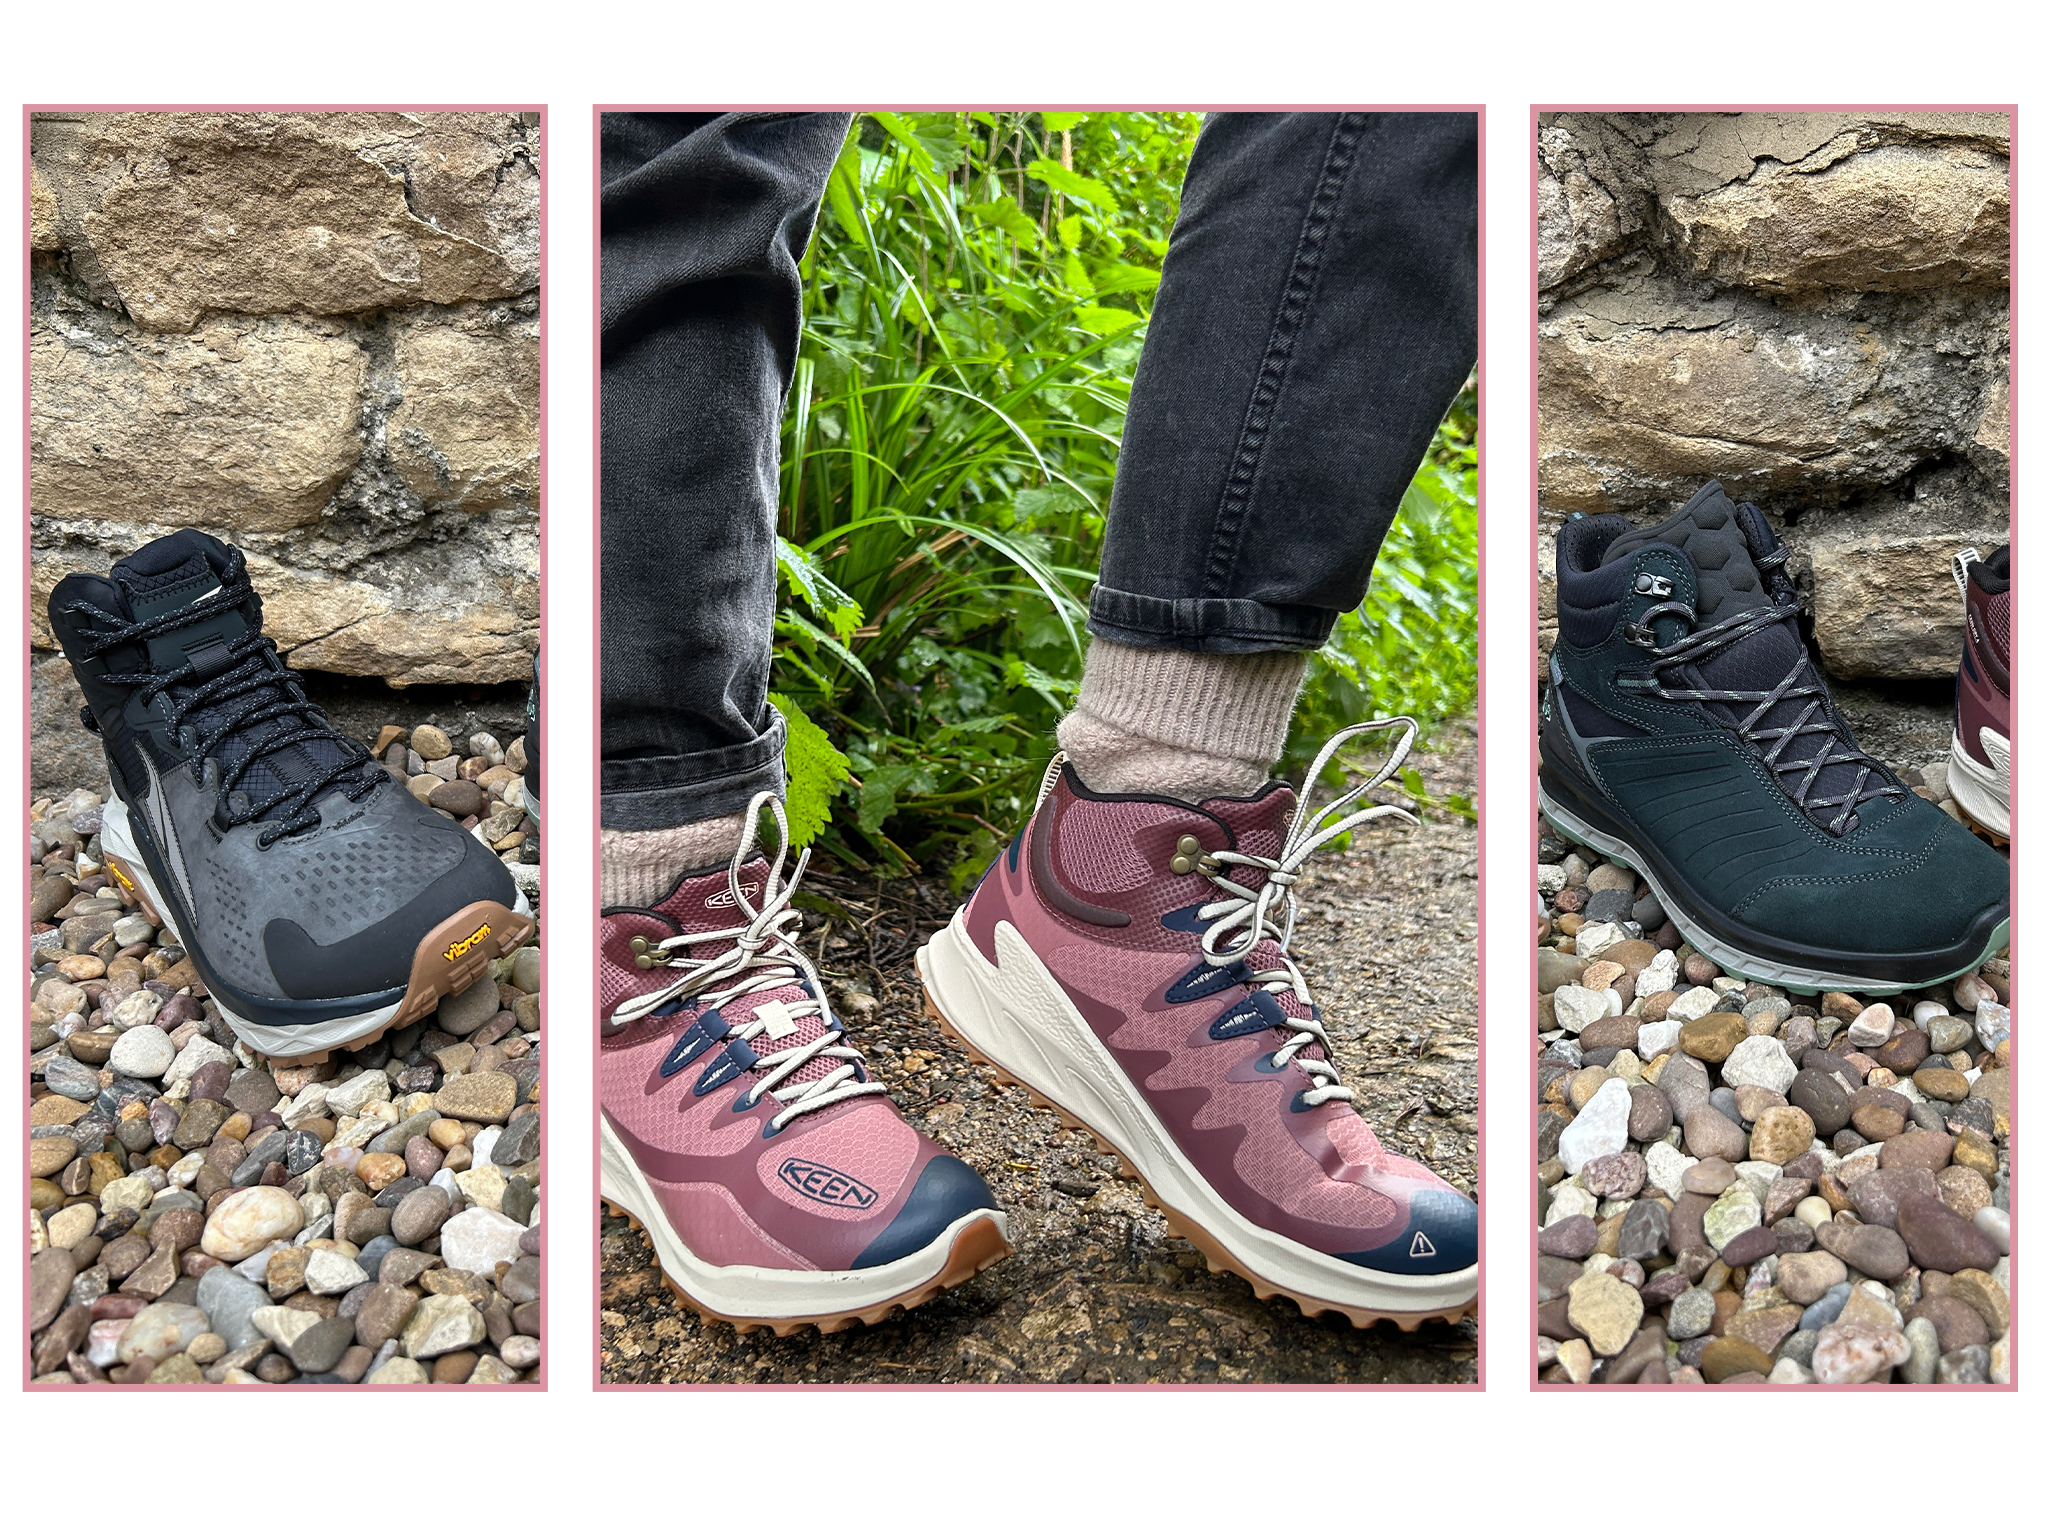 These boots are made for walking, and that’s just what our reviewer did during testing